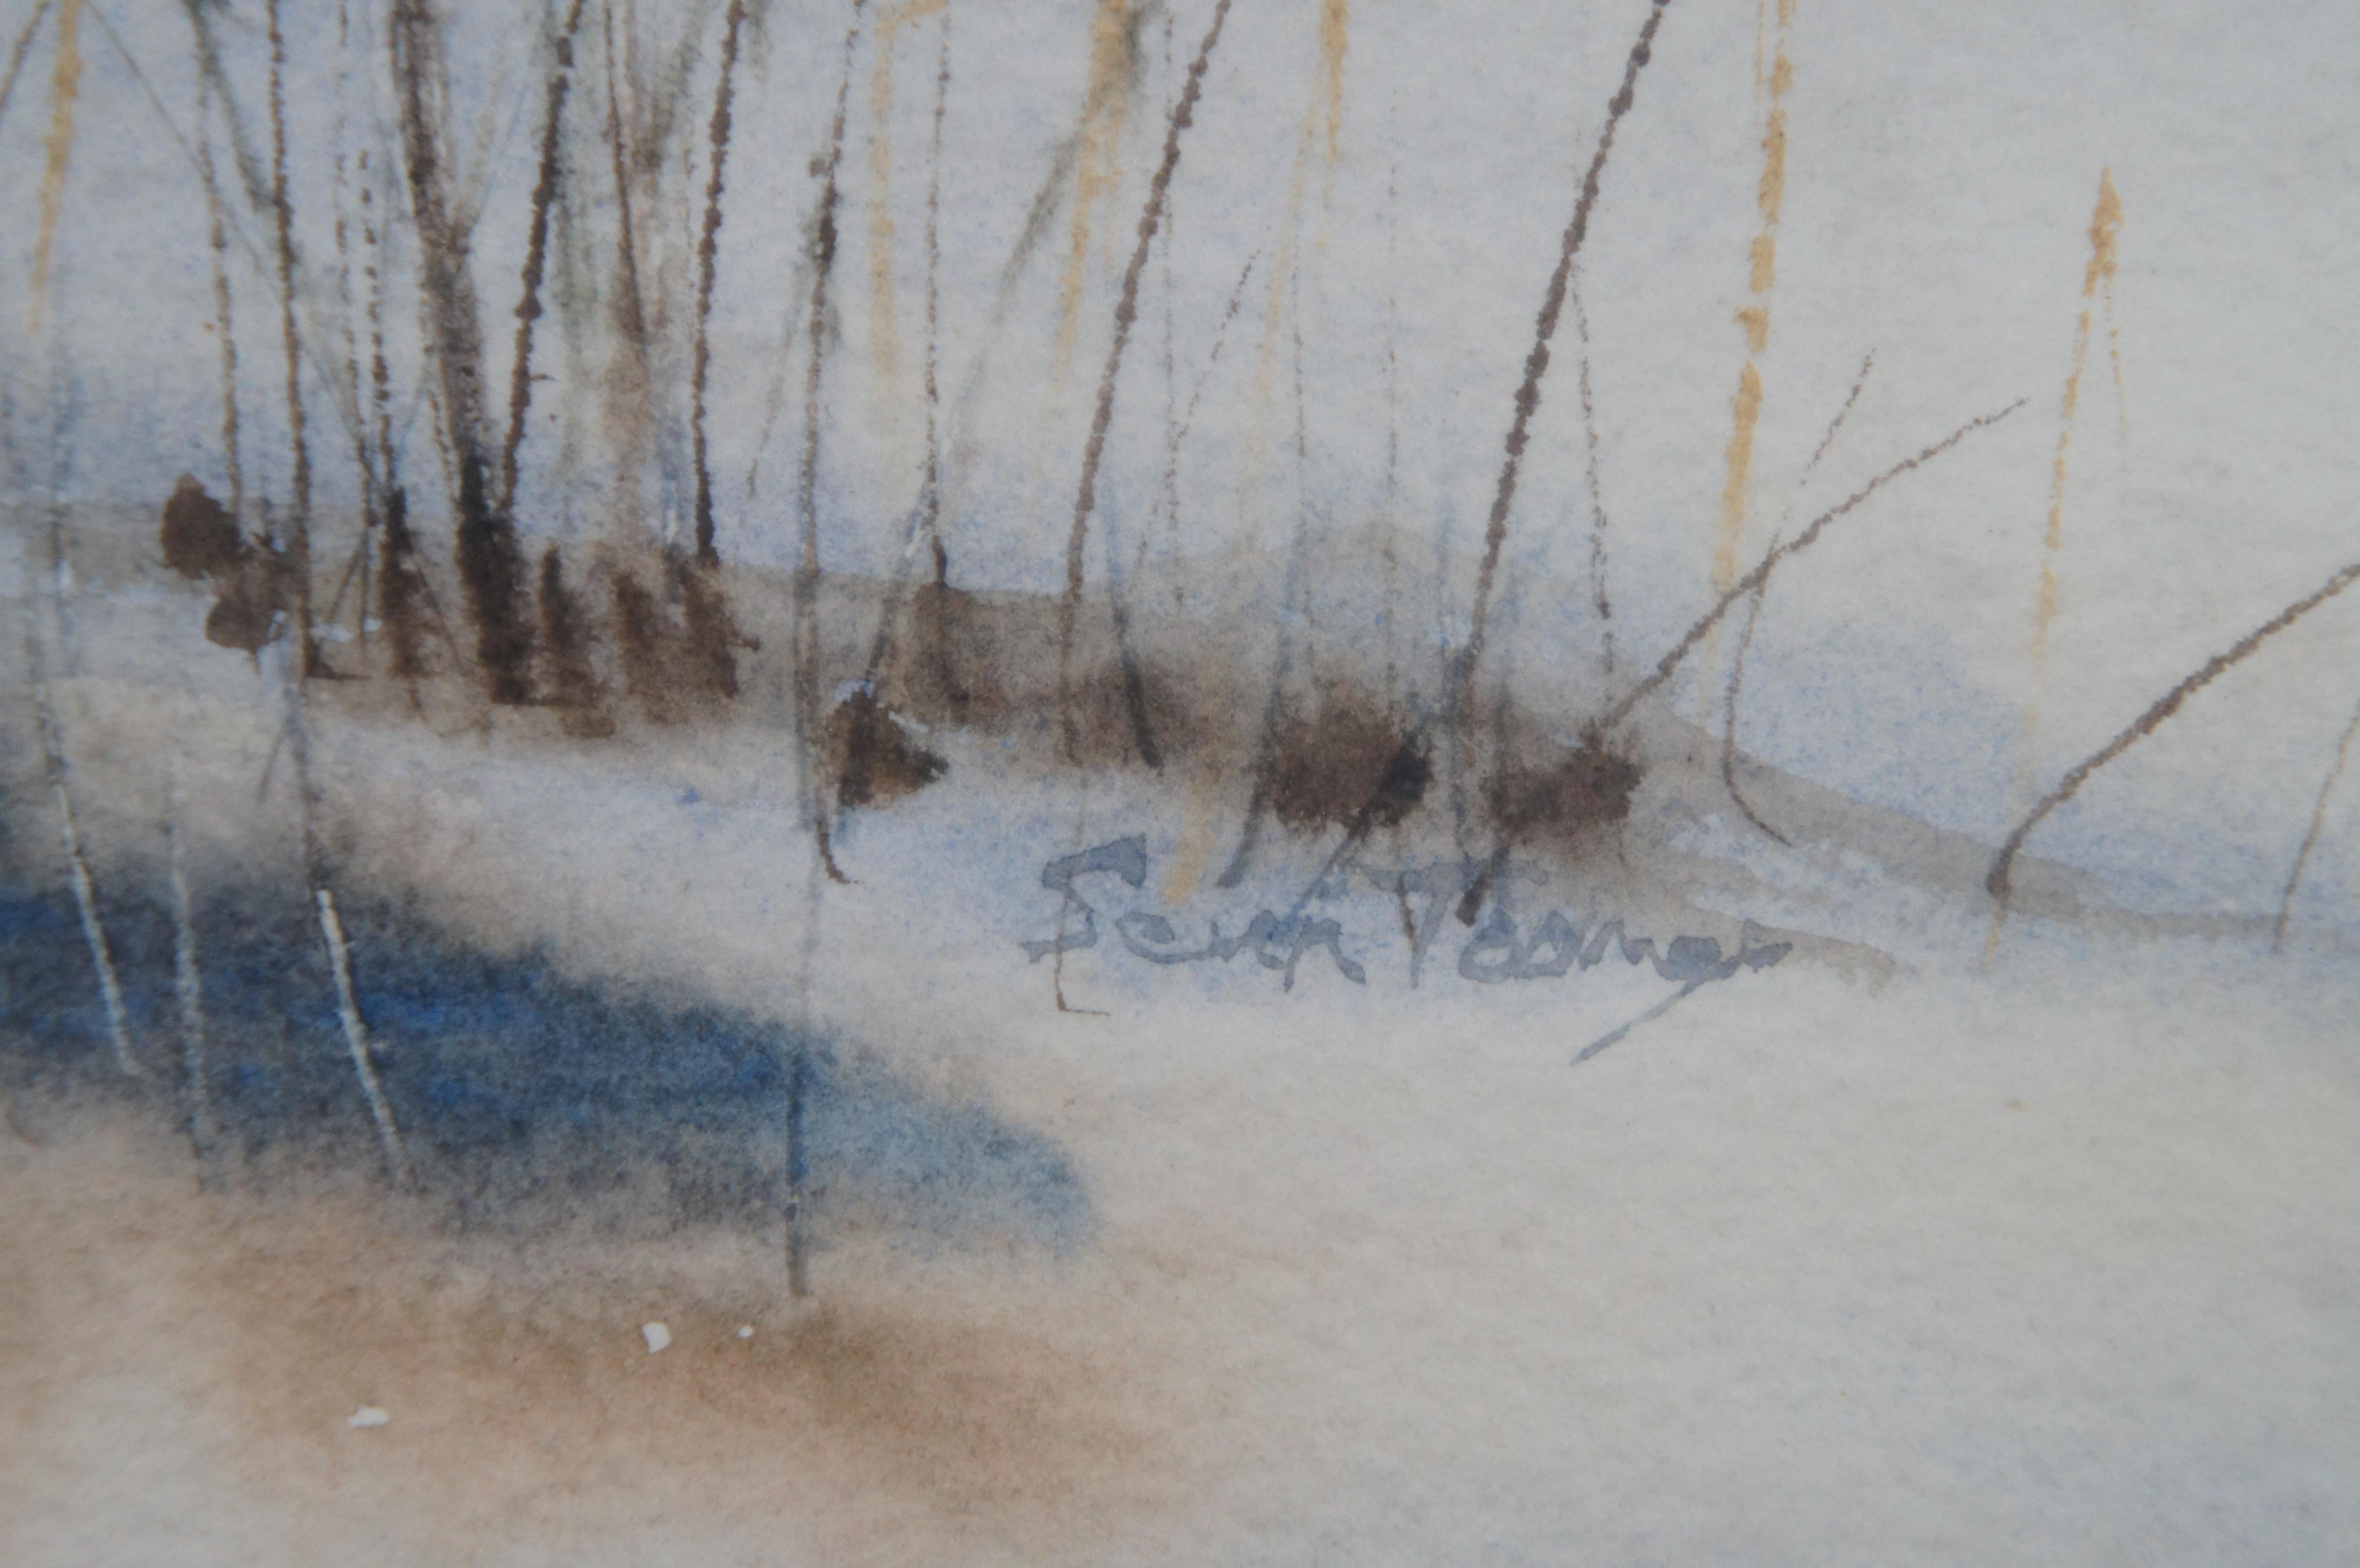 1975 Vintage Watercolor Landscape Painting December Morning by Sean Toomey 27